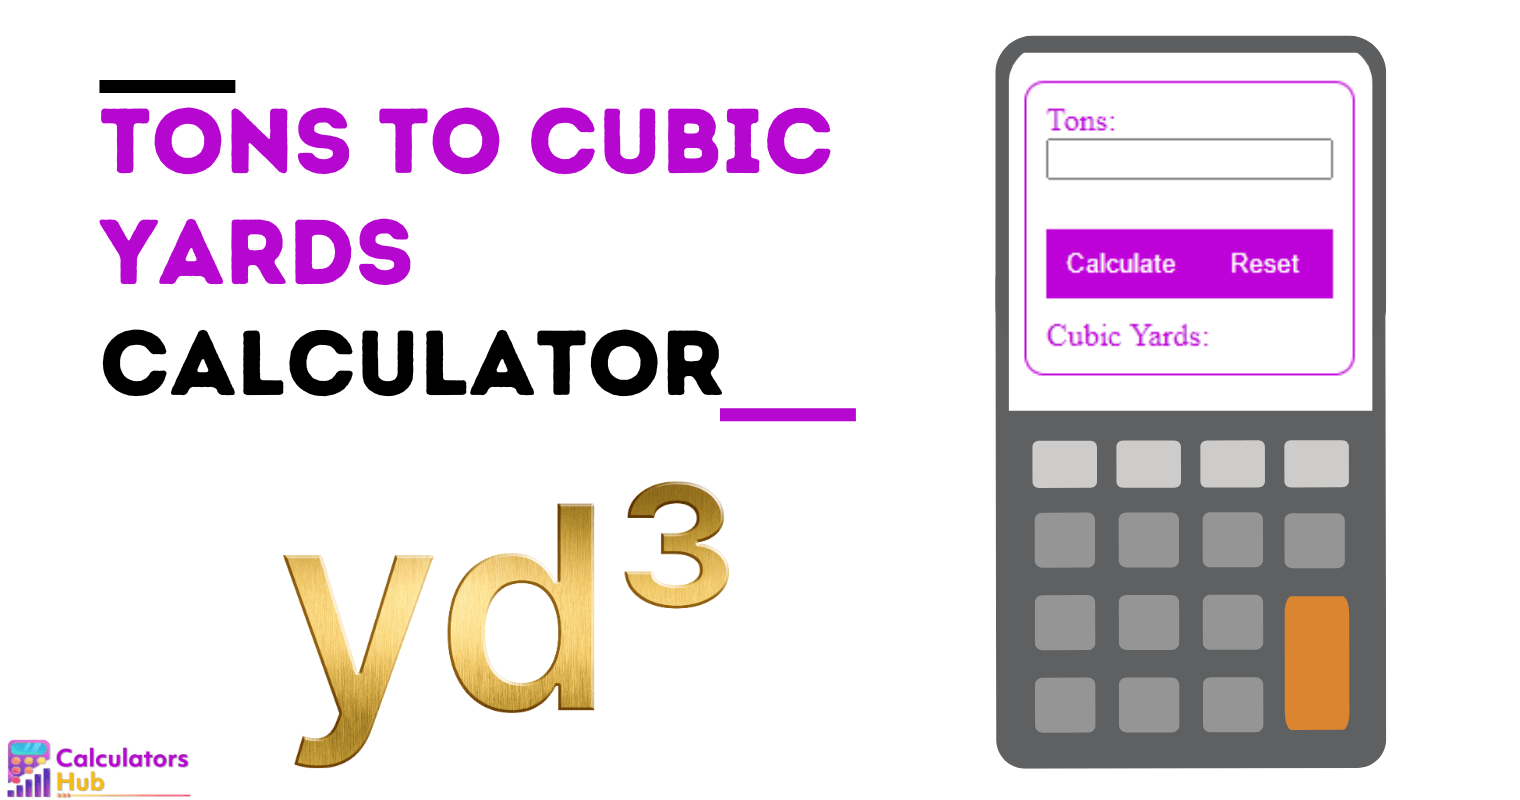 Tons to Cubic Yards Calculator